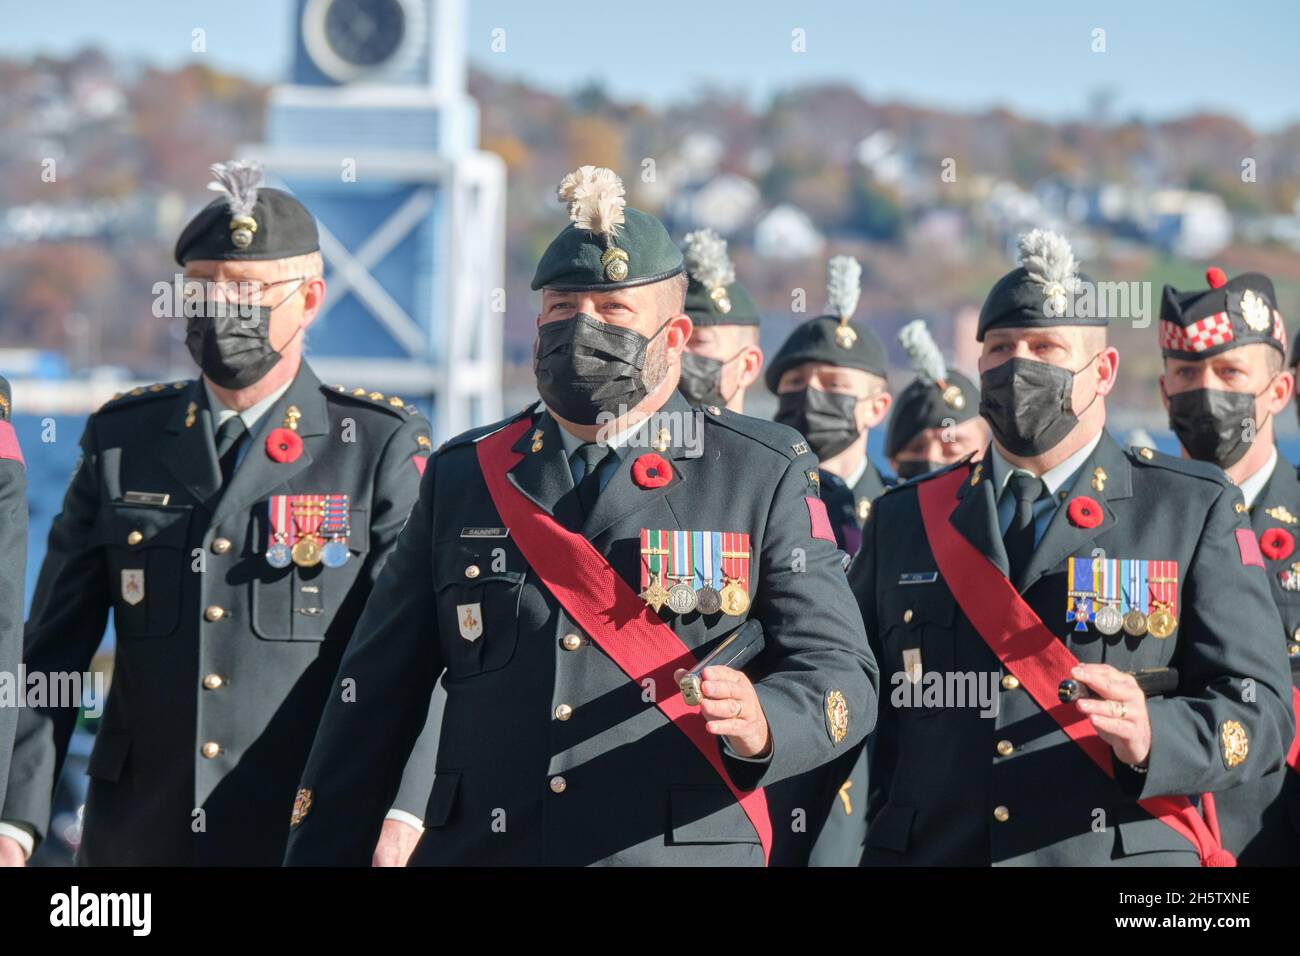 Halifax, Nova Scotia, Canada. November 11th, 2021. Remembrance Day ceremony on the 100th anniversary of the remembrance poppy in Canada, held at the Halifax Cenotaph and at Province House. Credit: meanderingemu/Alamy Live News Stock Photo